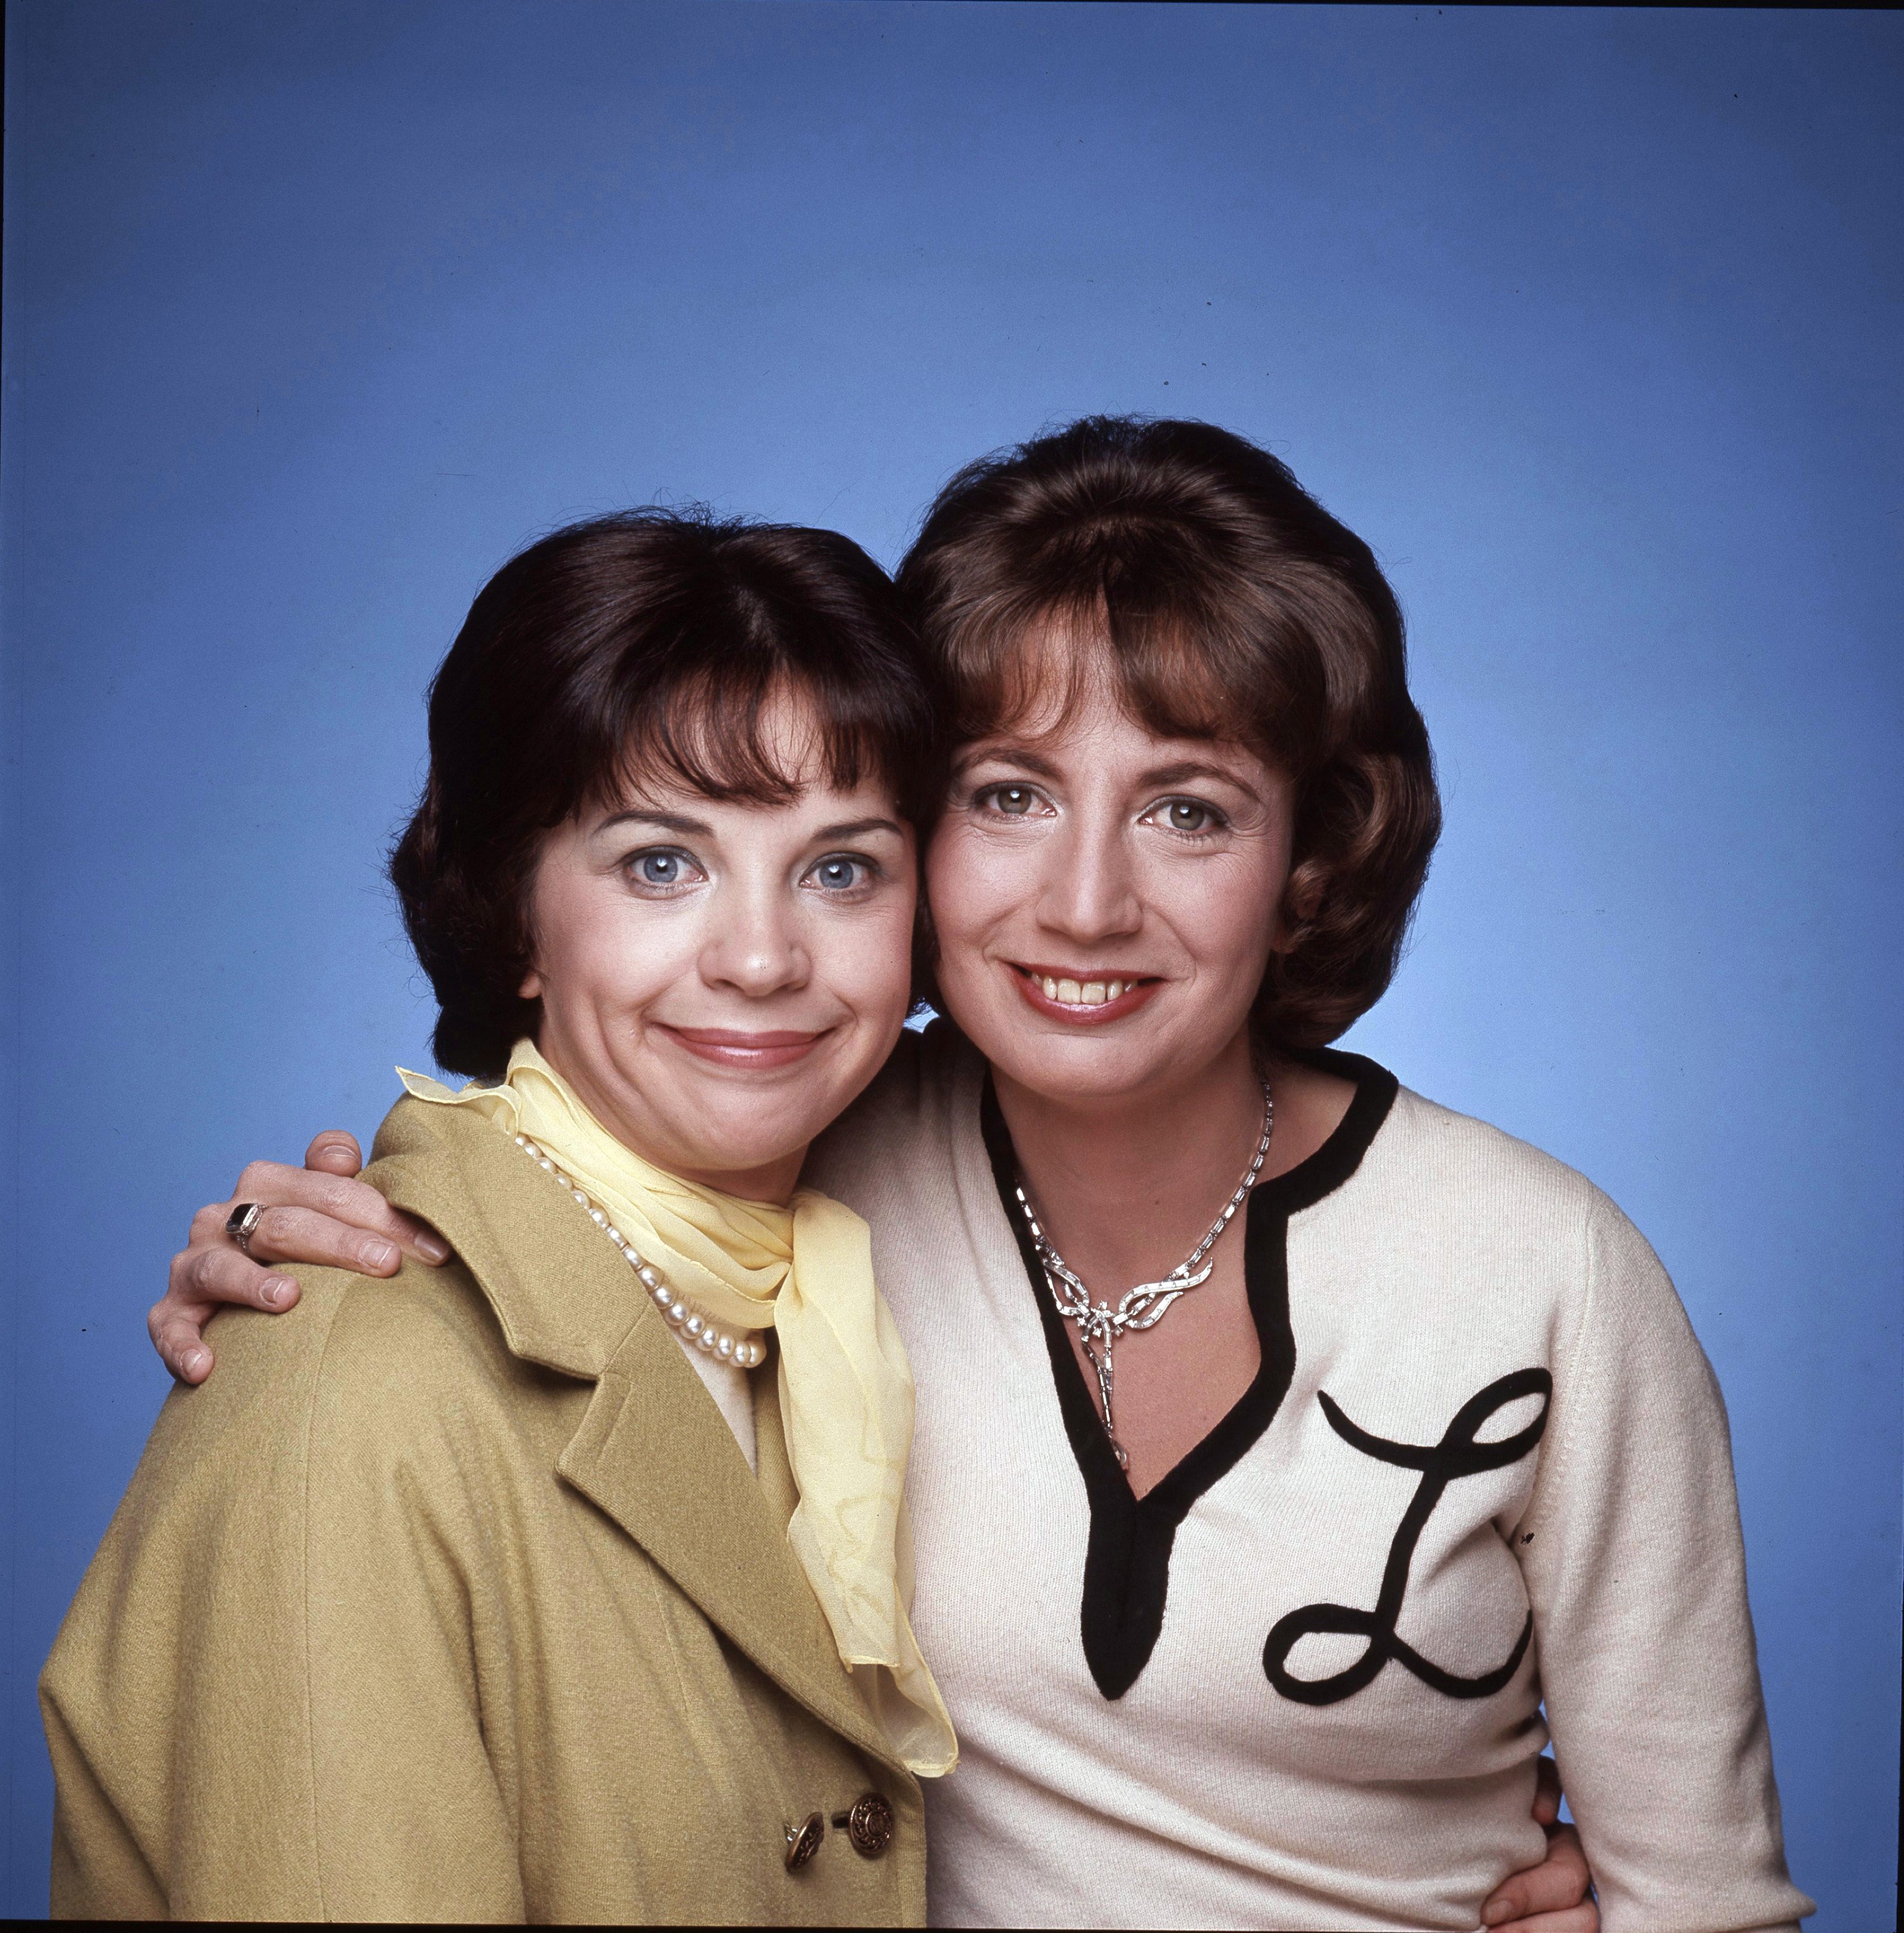 Actors Cindy Williams and Penny Marshall in a promotional photo for the "Laverne and Shirley," sitcom on December 18, 1975 | Source: Getty Images